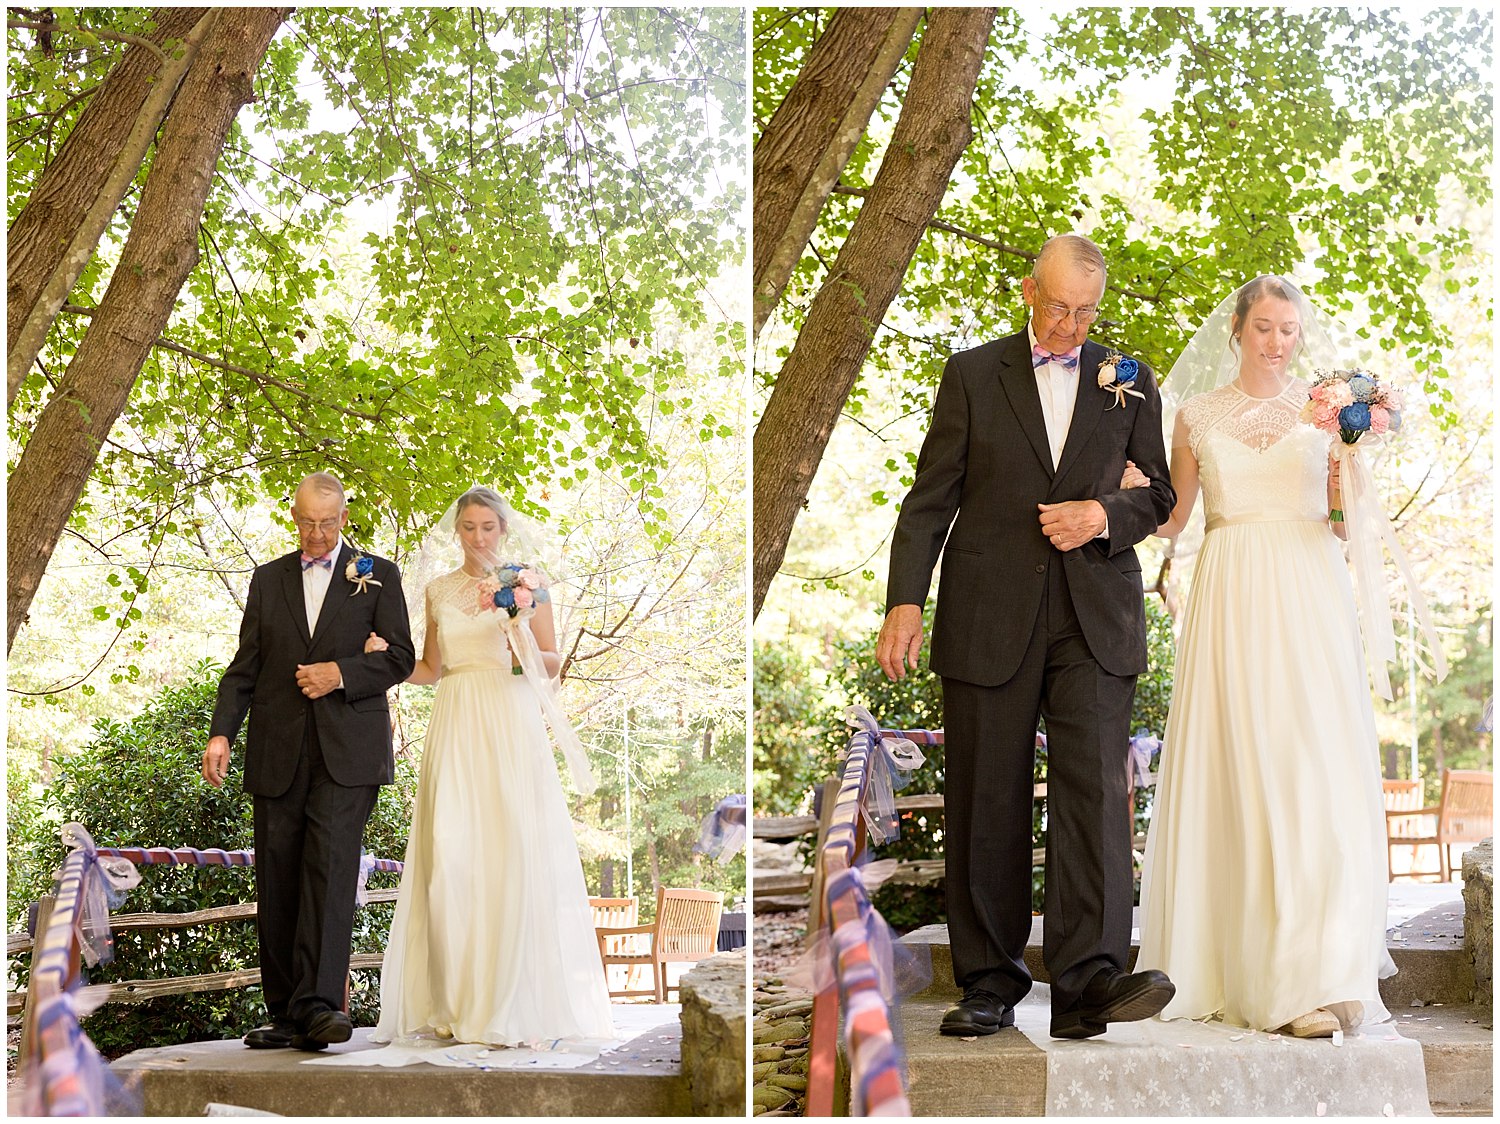 bride and father walking down aisle at camp wedding - destination wedding photographer